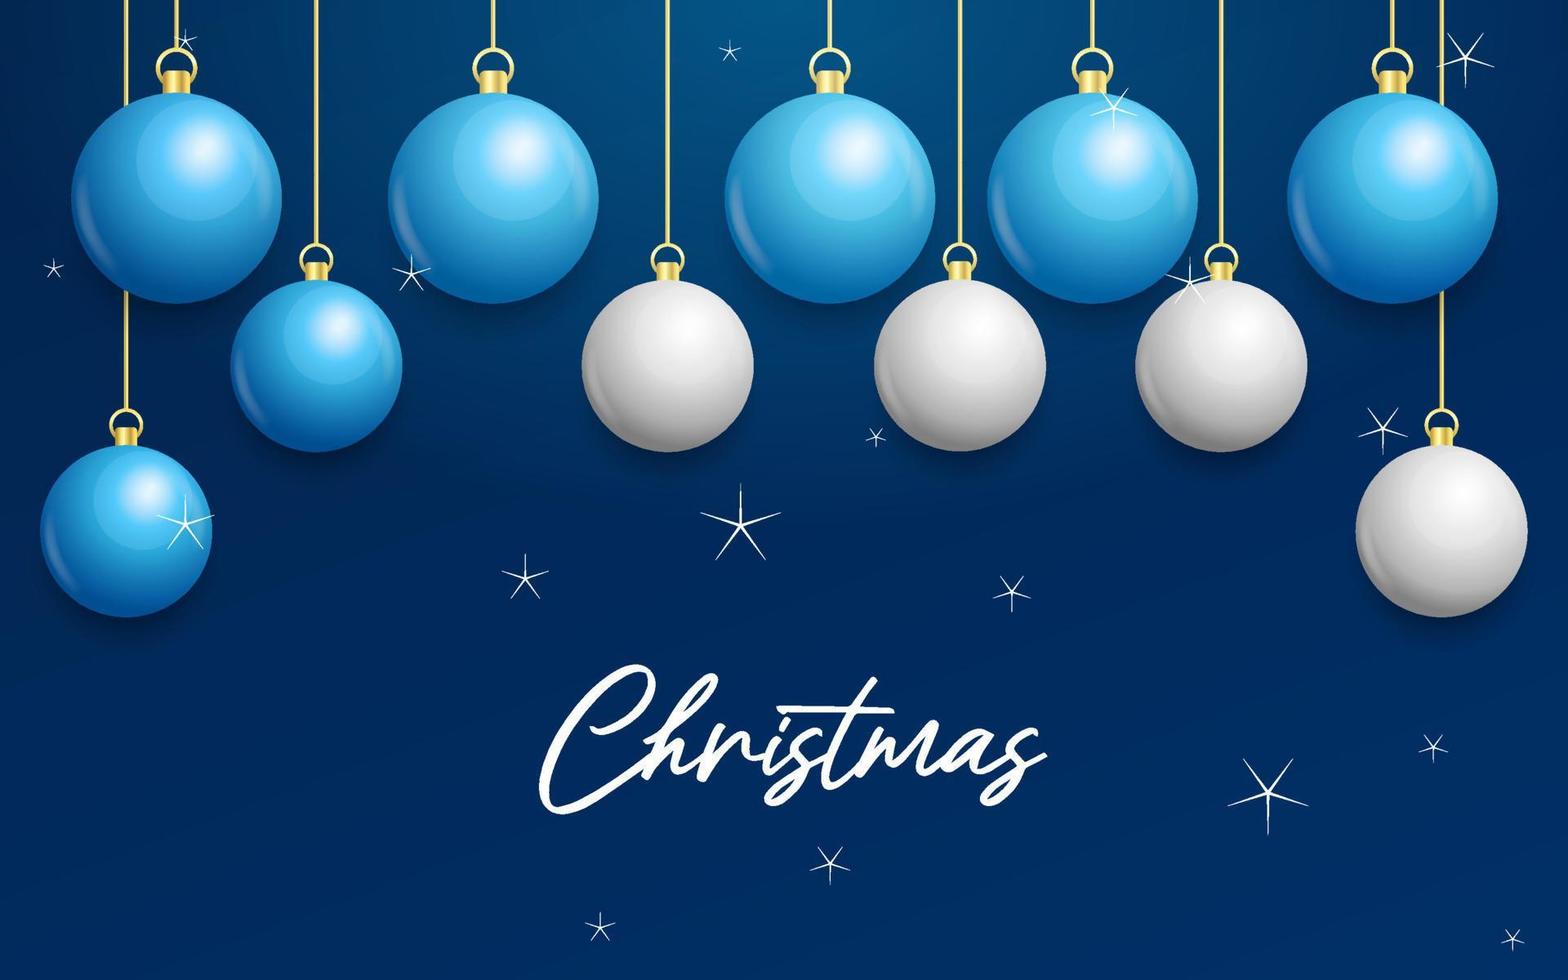 Christmas blue background with hanging shining white and Silver balls. Merry christmas greeting card vector